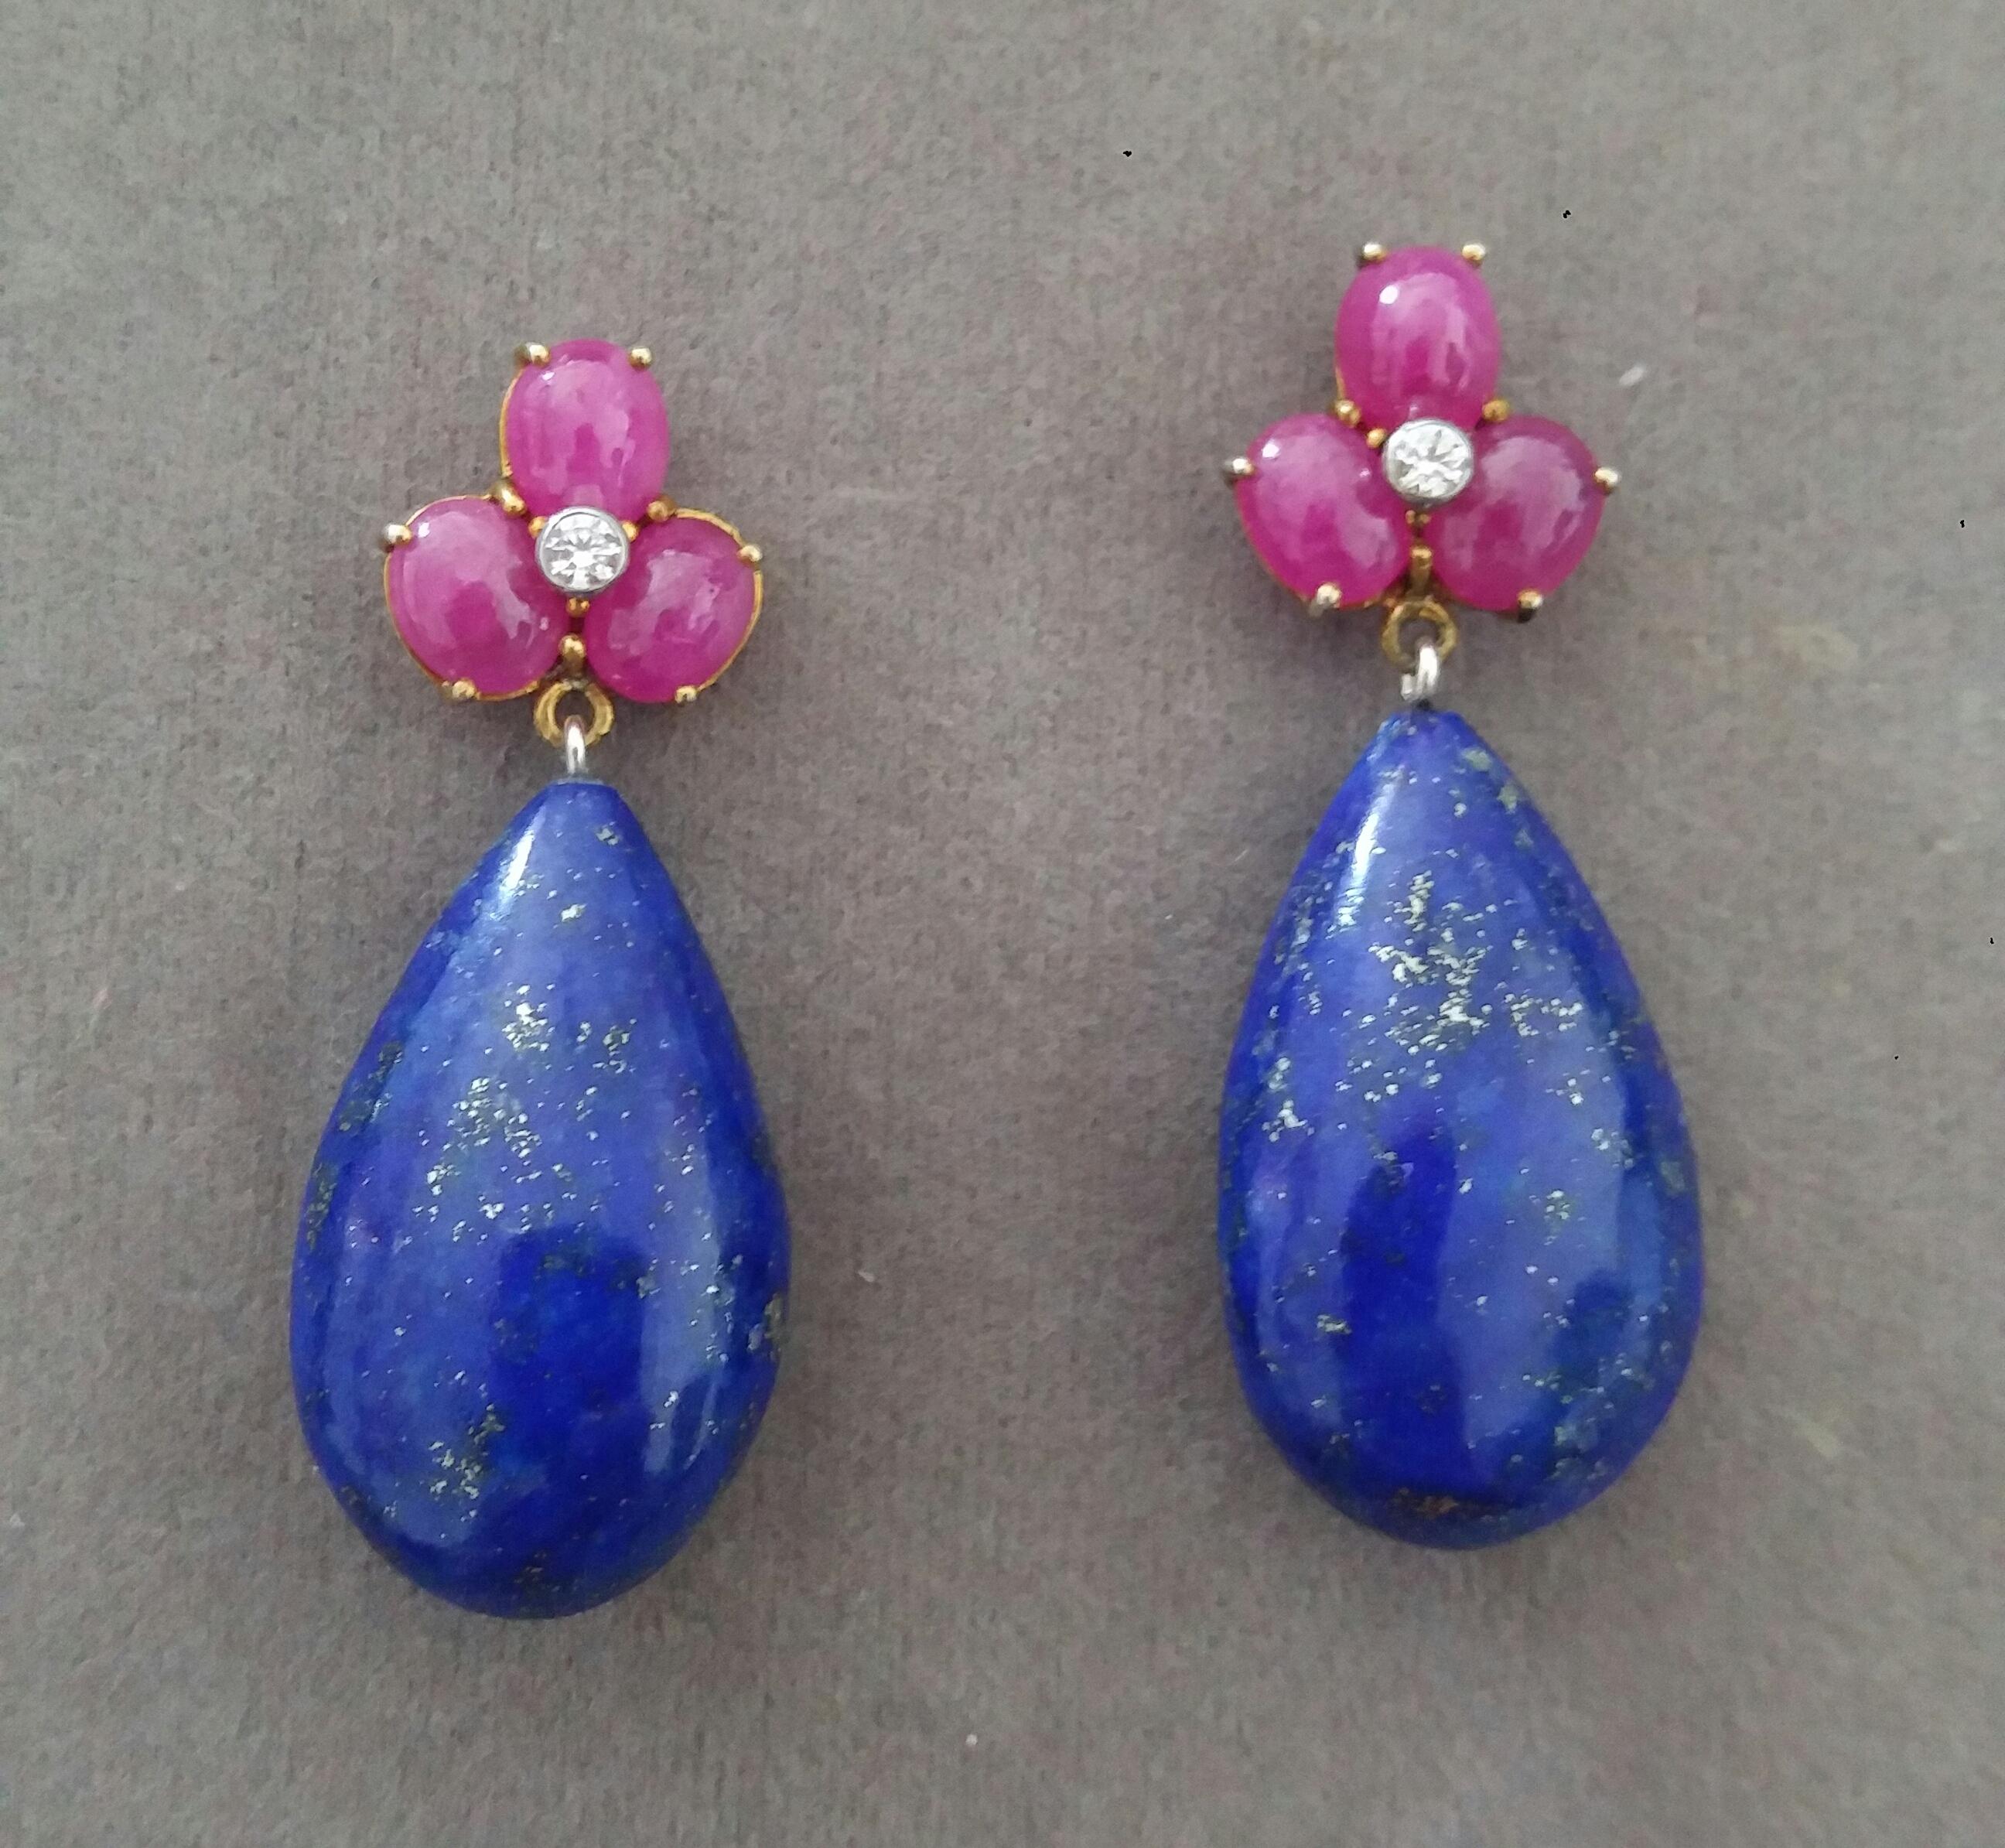 Elegant and completely handmade Earrings consisting of an upper part of 6 oval shape Ruby cabs of 4 mm x 5 mm set together in 14 Kt yellow gold with 2 small diamonds in the center, at the bottom 2 nice Pear Shape Natural Lapis Lazuli measuring 14 mm